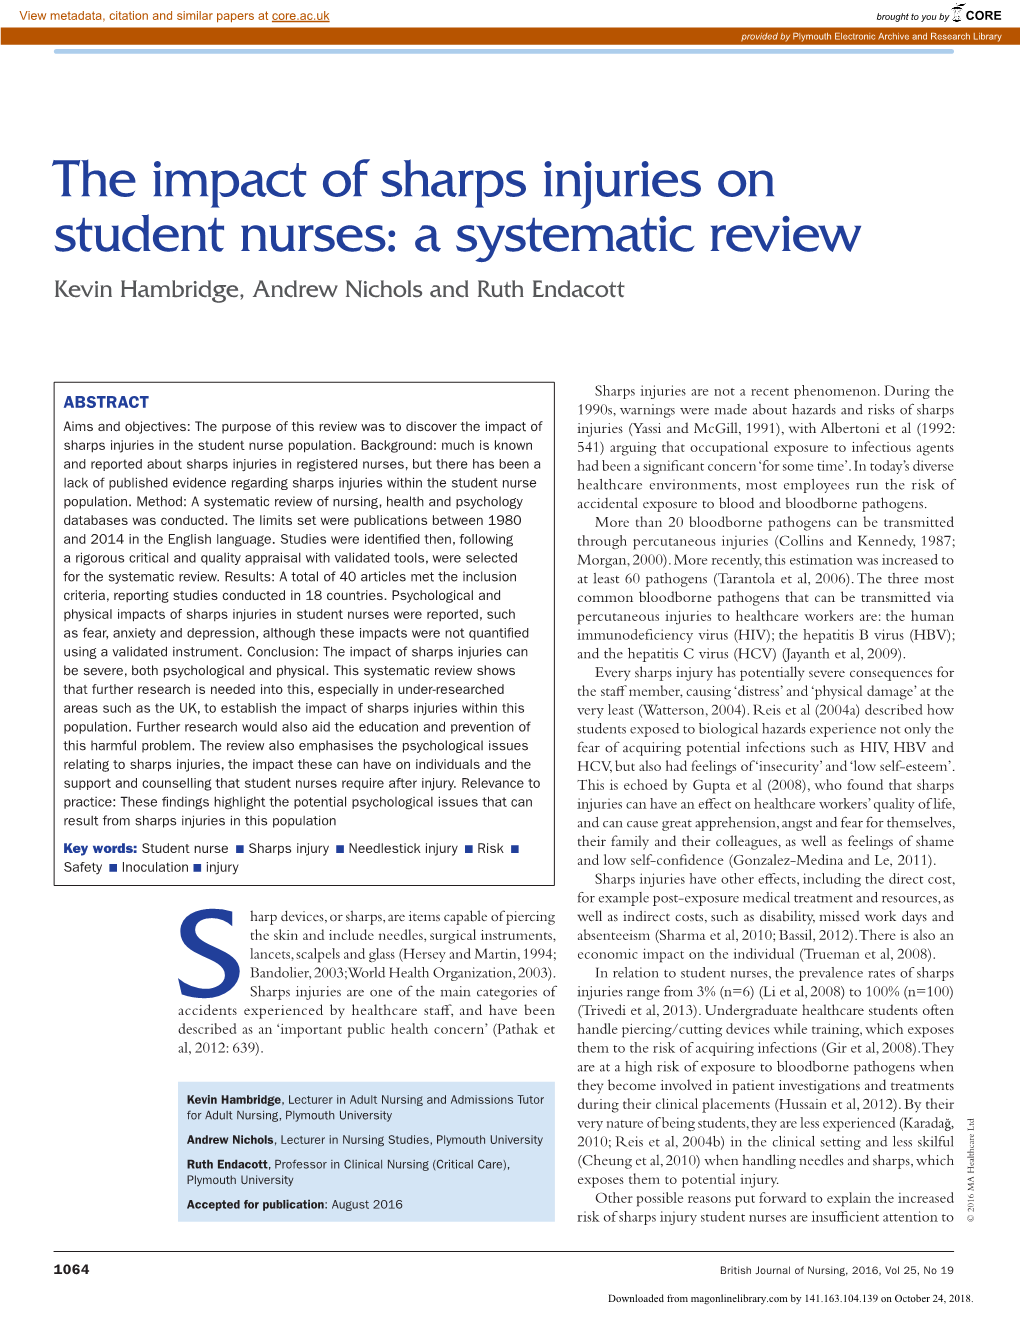 The Impact of Sharps Injuries on Student Nurses: a Systematic Review Kevin Hambridge, Andrew Nichols and Ruth Endacott